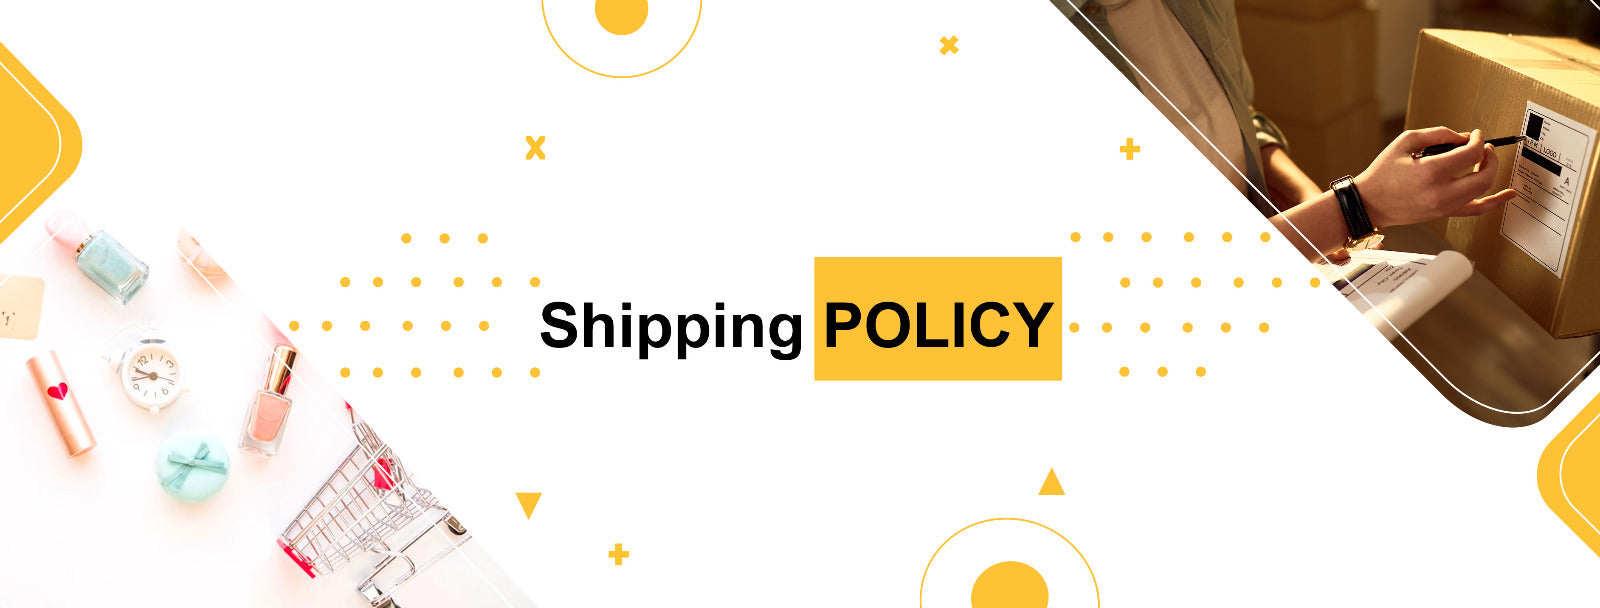 shoppingqueen-shipping-policy